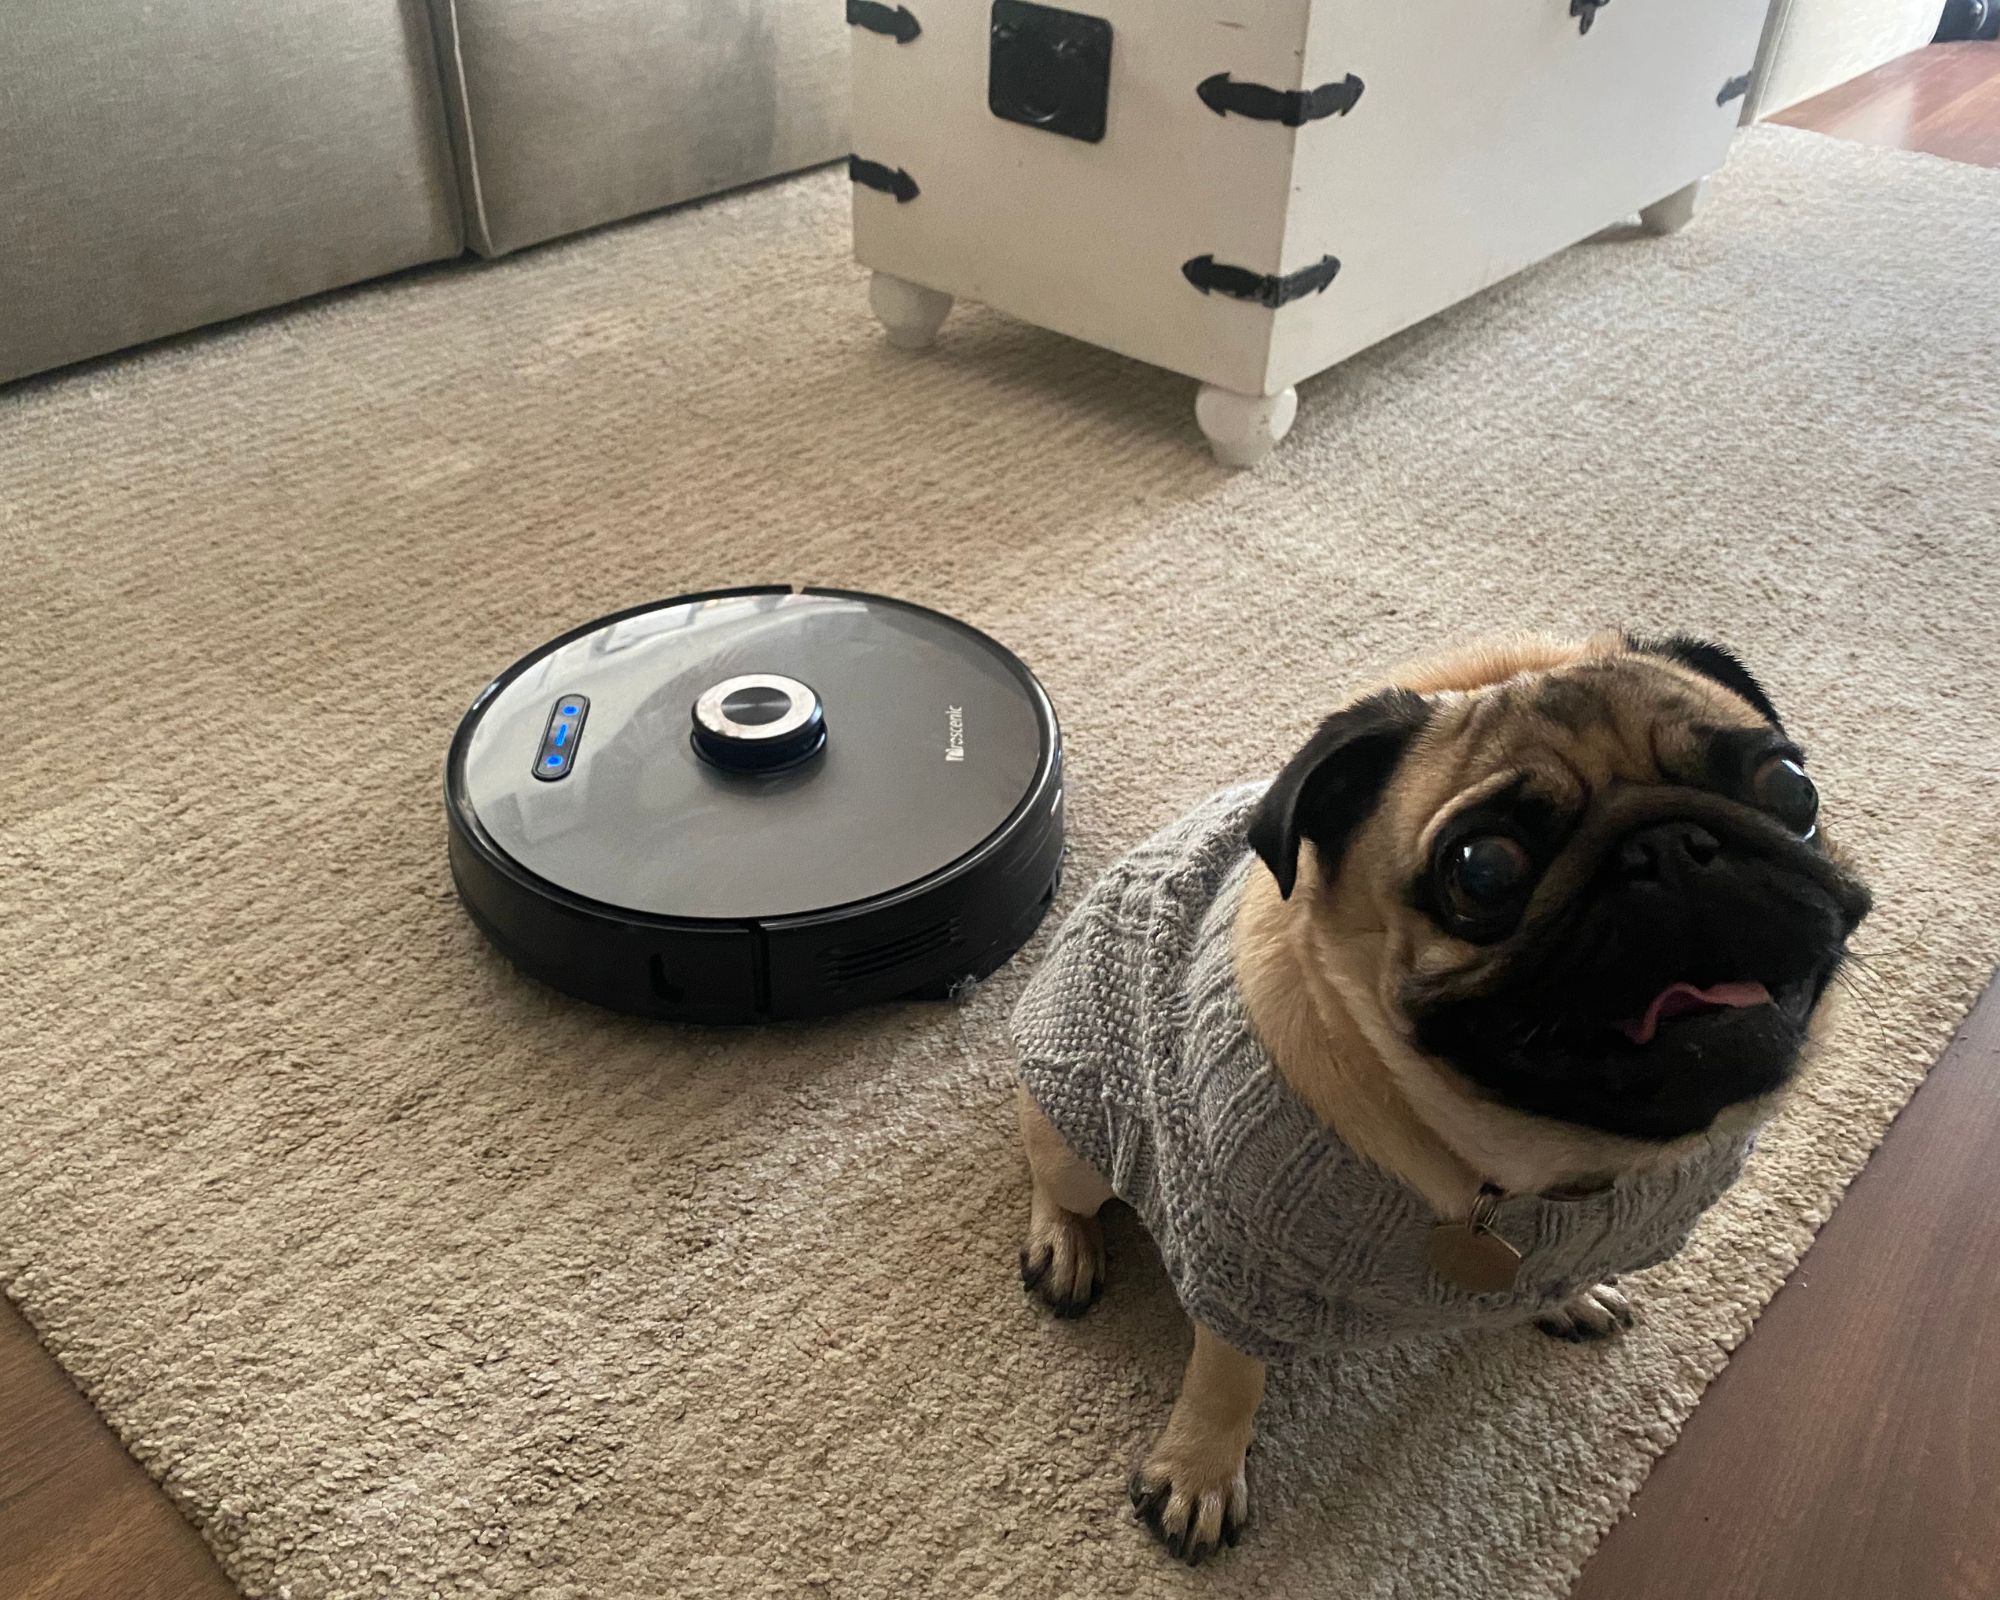 Proscenic M8 Pro on rug with Pug in jumper stood next to it